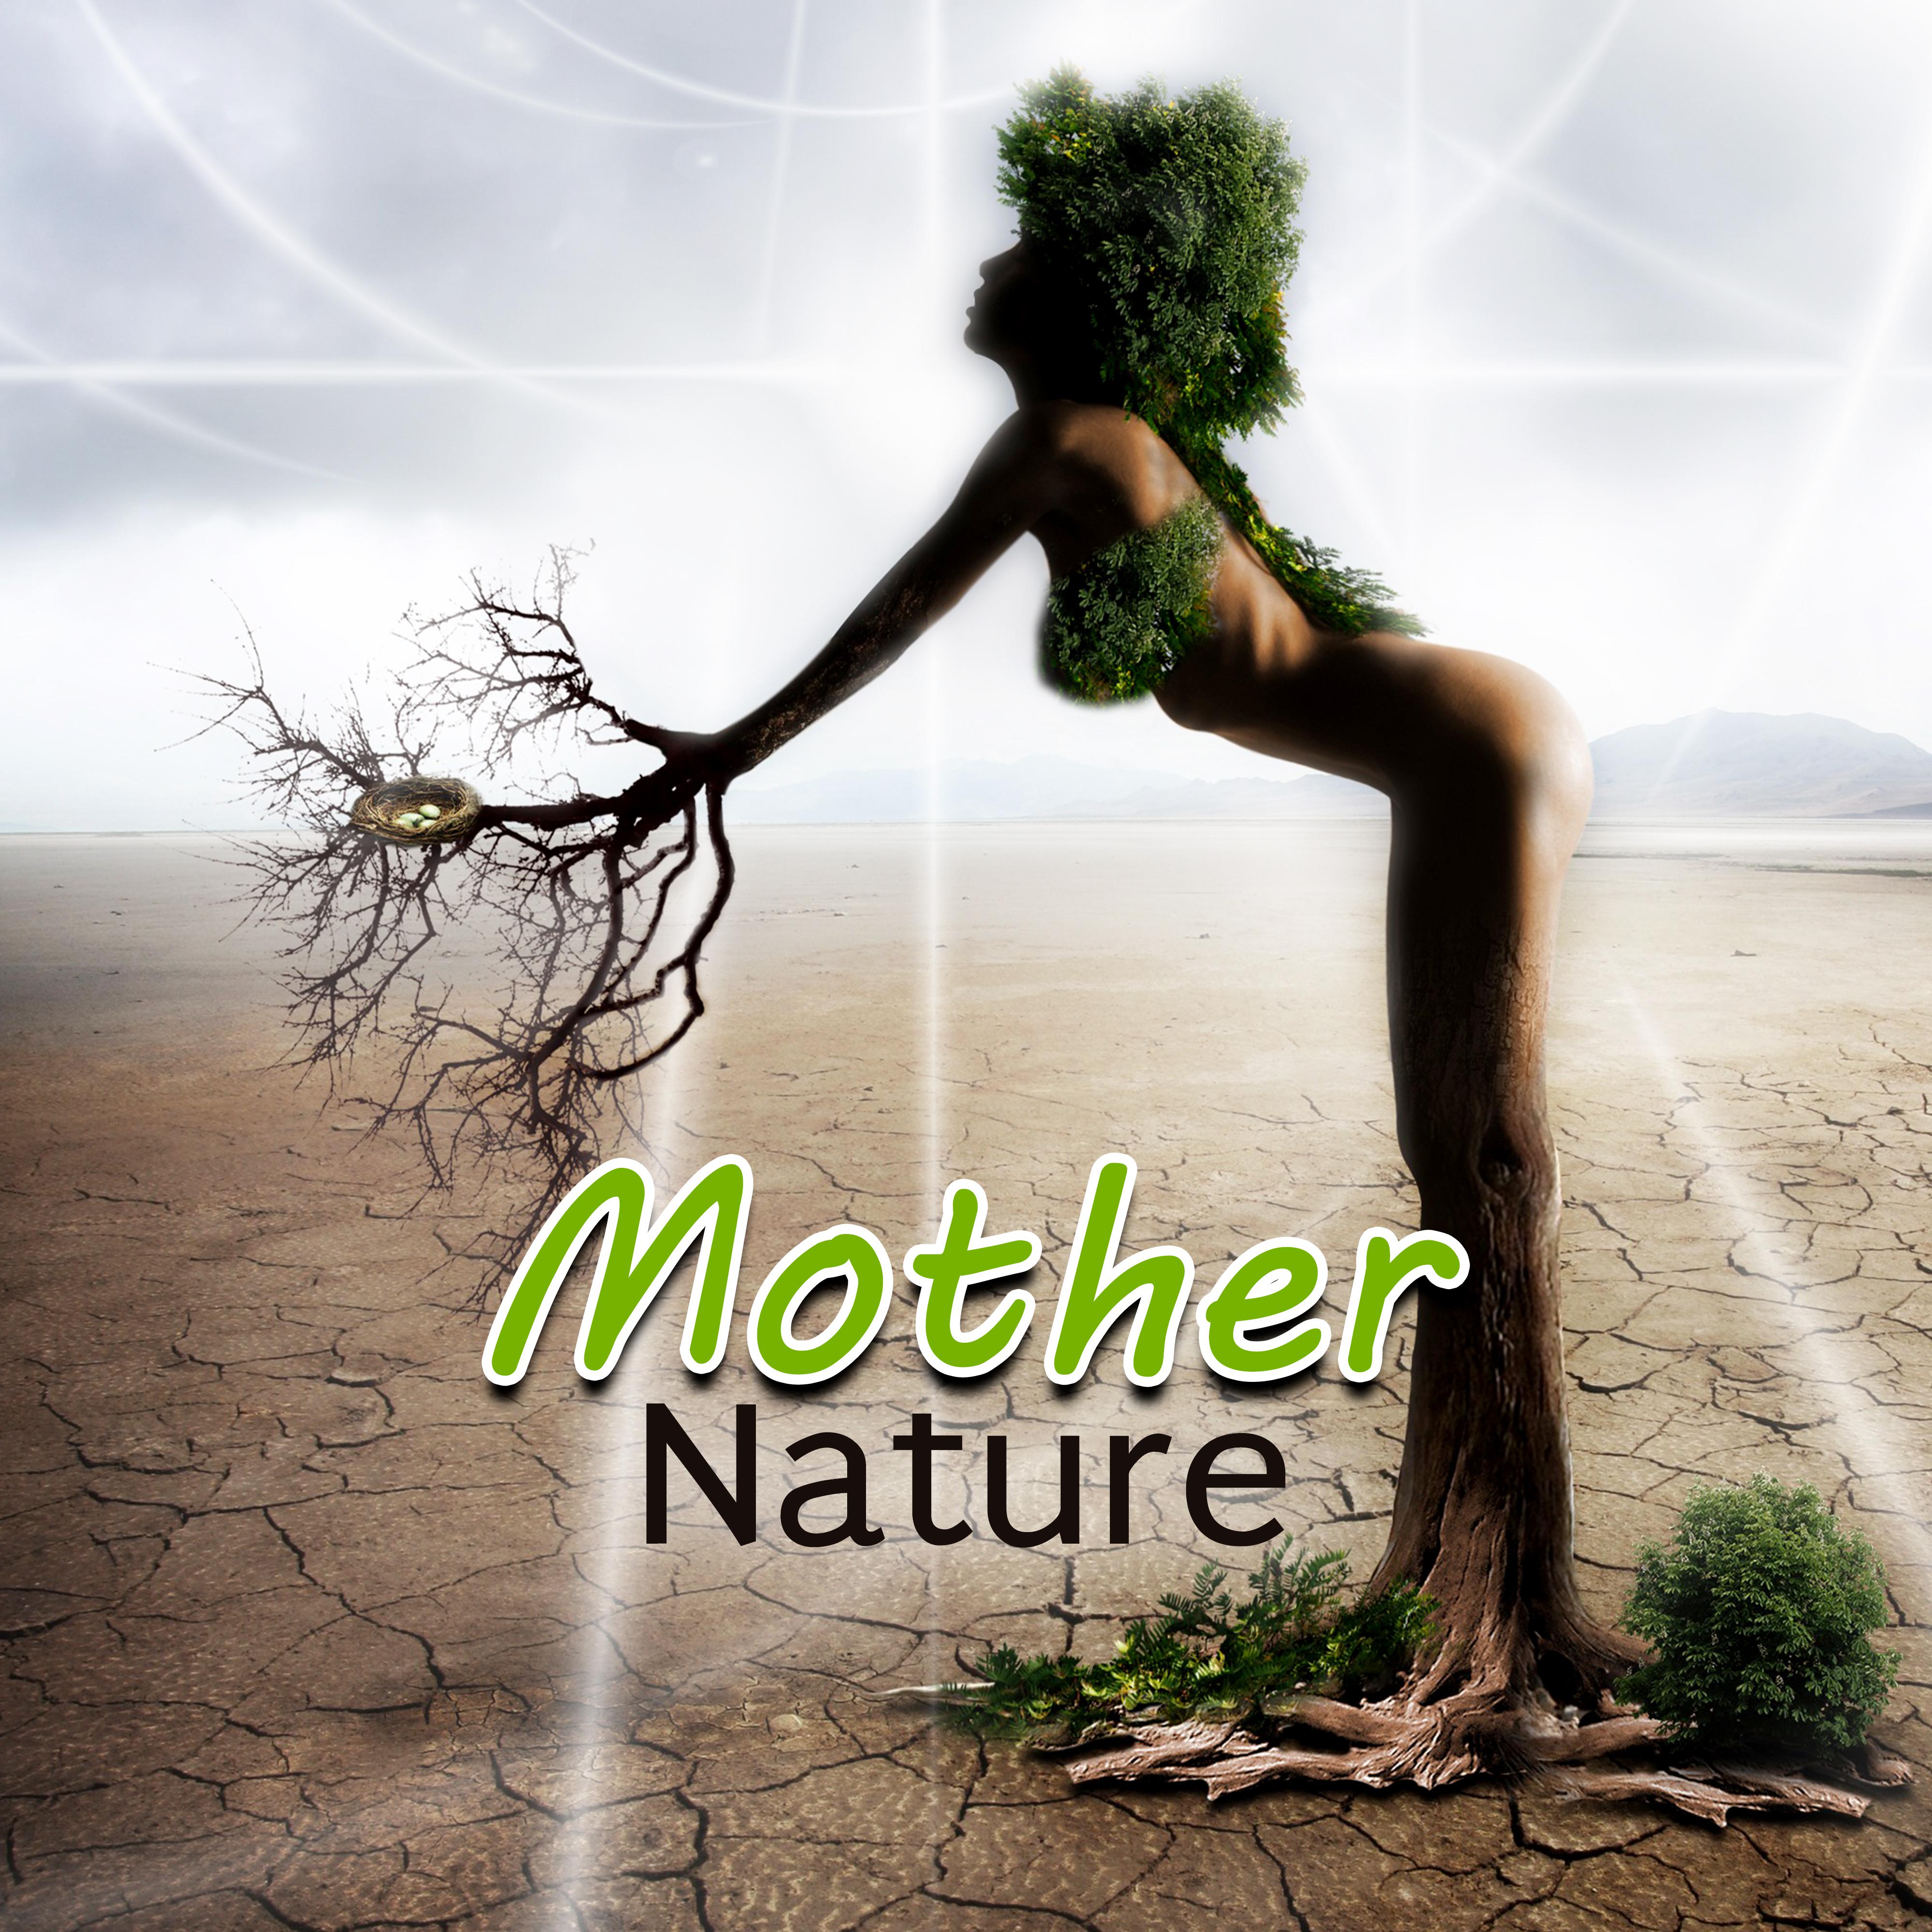 Mother Nature – Soothing Nature Music for Sleeping, Yoga and Relaxation Meditation, Ocean Waves, Bird Calls, Rain Sounds, Crickets, Waterfall